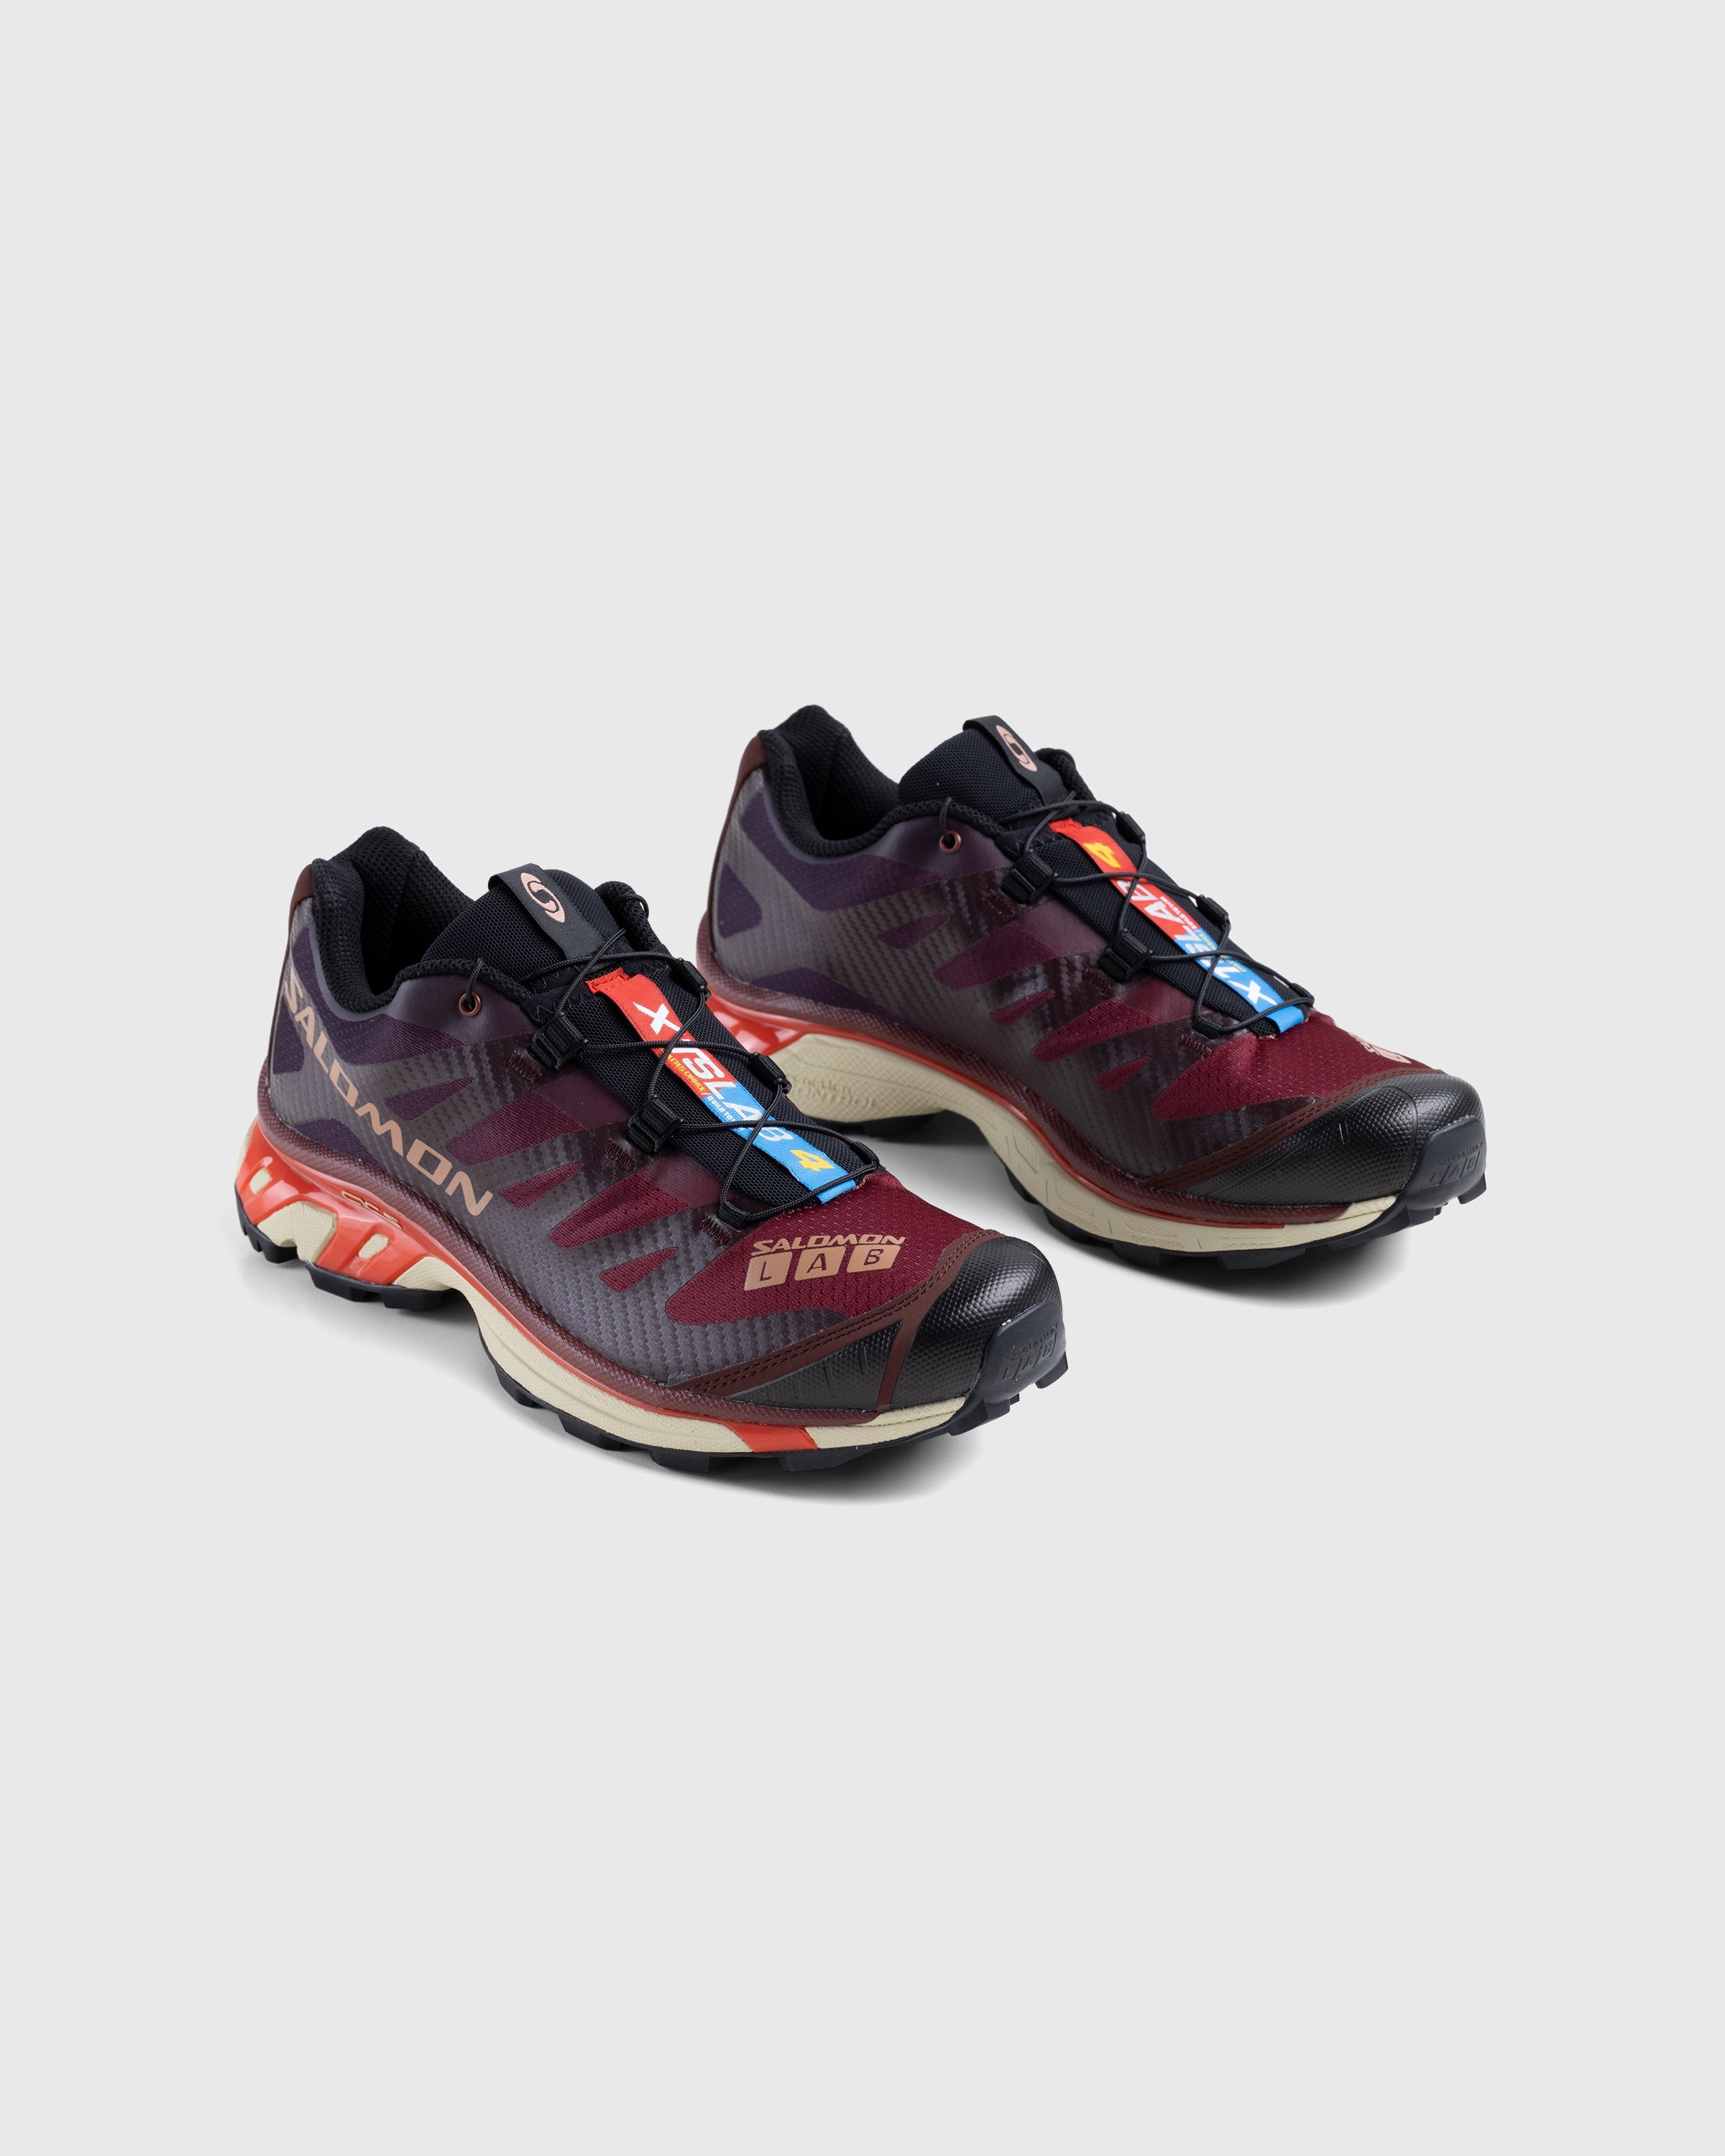 Salomon – XT-4 Bitter Chocolate/Mocha Mousse/Fiery Red - Sneakers - Red - Image 3